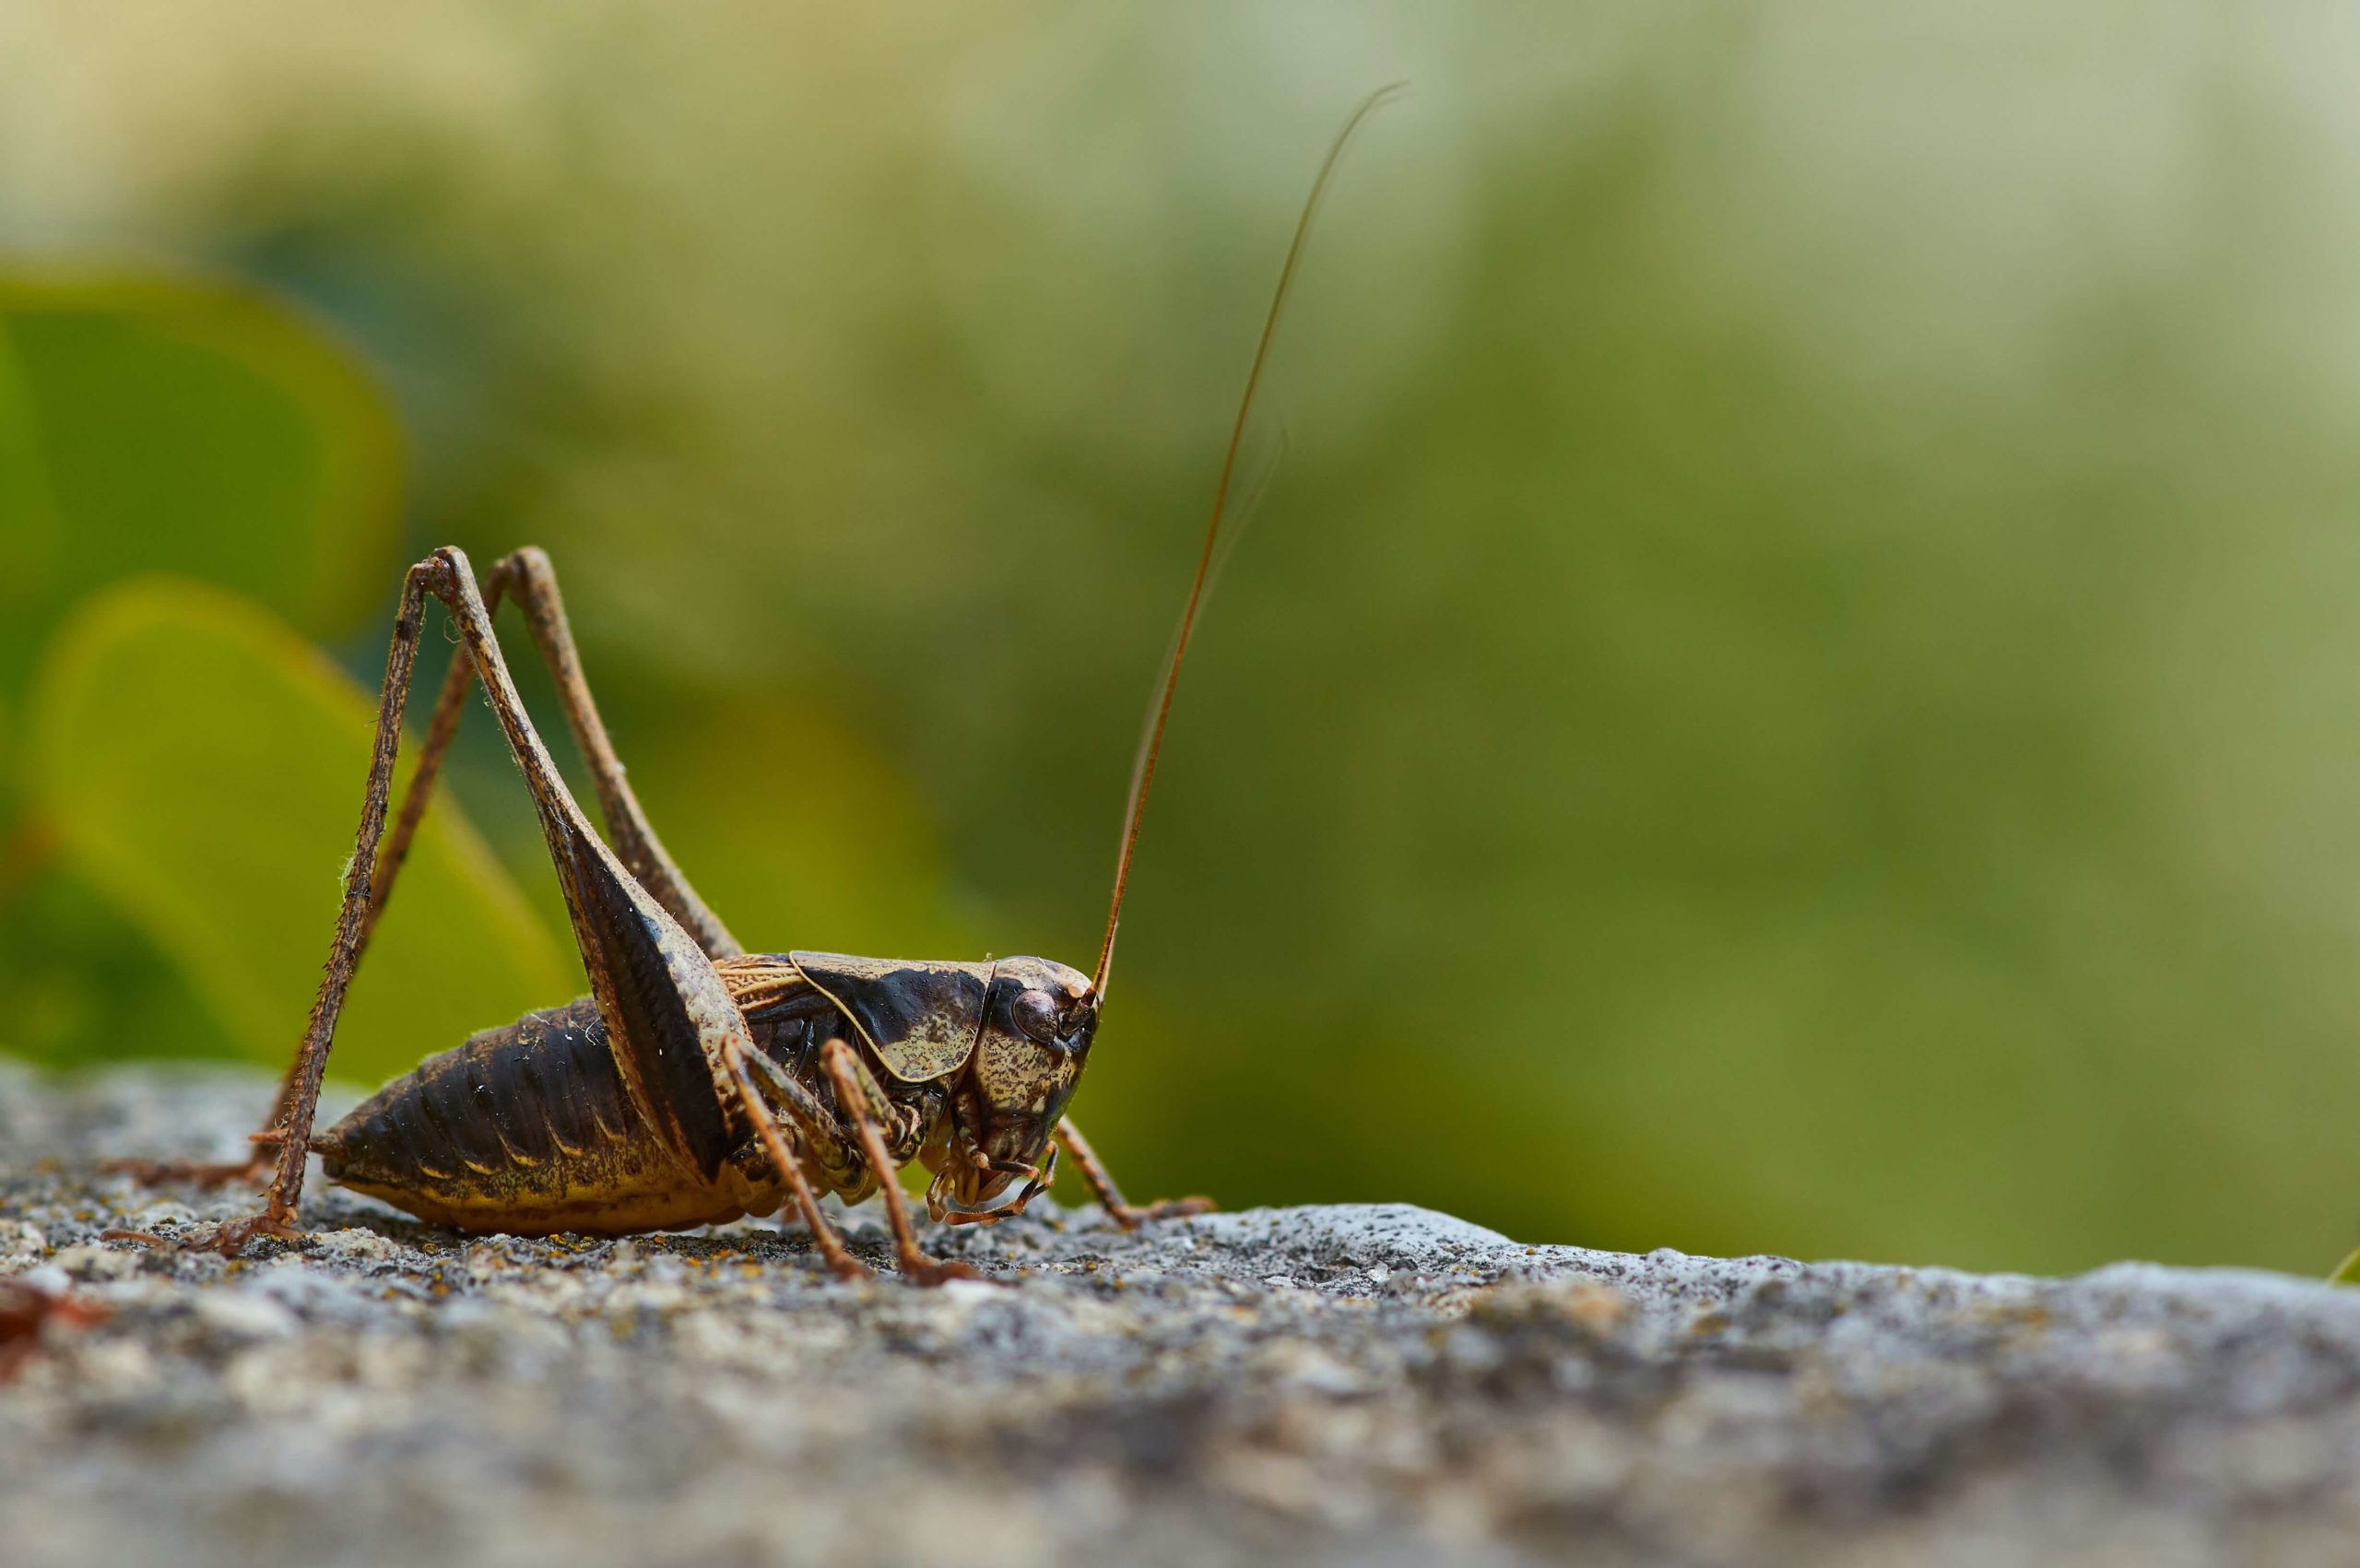 Picture of a cricket - what do they eat?